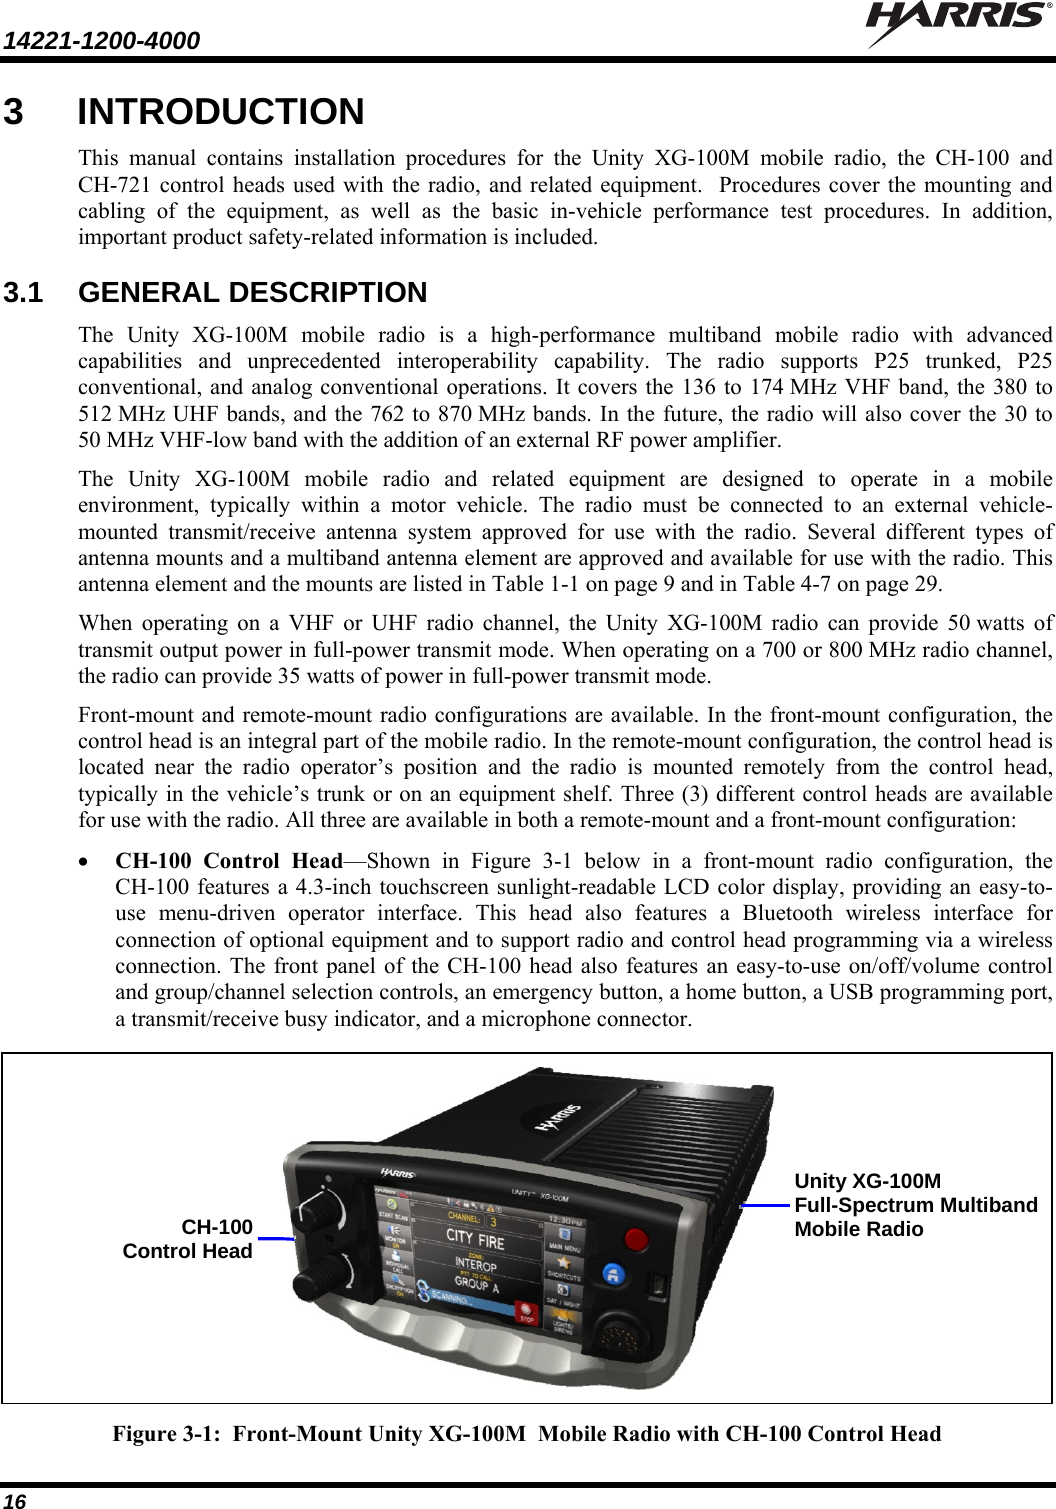 14221-1200-4000    16 3 INTRODUCTION This manual contains installation procedures for the Unity XG-100M mobile radio, the CH-100 and CH-721 control heads used with the radio, and related equipment.  Procedures cover the mounting and cabling of the equipment, as well as the basic in-vehicle performance test procedures. In addition, important product safety-related information is included. 3.1 GENERAL DESCRIPTION The Unity XG-100M mobile radio is a high-performance multiband mobile radio with advanced capabilities and unprecedented interoperability capability. The radio supports P25 trunked, P25 conventional, and analog conventional operations. It covers the 136 to 174 MHz VHF band, the 380 to 512 MHz UHF bands, and the 762 to 870 MHz bands. In the future, the radio will also cover the 30 to 50 MHz VHF-low band with the addition of an external RF power amplifier. The Unity XG-100M mobile radio and related equipment are designed to operate in a mobile environment, typically within a motor vehicle. The radio must be connected to an external vehicle-mounted transmit/receive antenna system approved for use with the radio. Several different types of antenna mounts and a multiband antenna element are approved and available for use with the radio. This antenna element and the mounts are listed in Table 1-1 on page 9 and in Table 4-7 on page 29. When operating on a VHF or UHF radio channel, the Unity XG-100M radio can provide 50 watts of transmit output power in full-power transmit mode. When operating on a 700 or 800 MHz radio channel, the radio can provide 35 watts of power in full-power transmit mode. Front-mount and remote-mount radio configurations are available. In the front-mount configuration, the control head is an integral part of the mobile radio. In the remote-mount configuration, the control head is located near the radio operator’s position and the radio is mounted remotely from the control head, typically in the vehicle’s trunk or on an equipment shelf. Three (3) different control heads are available for use with the radio. All three are available in both a remote-mount and a front-mount configuration:  CH-100 Control Head—Shown in Figure 3-1 below in a front-mount radio configuration, the CH-100 features a 4.3-inch touchscreen sunlight-readable LCD color display, providing an easy-to-use menu-driven operator interface. This head also features a Bluetooth wireless interface for connection of optional equipment and to support radio and control head programming via a wireless connection. The front panel of the CH-100 head also features an easy-to-use on/off/volume control and group/channel selection controls, an emergency button, a home button, a USB programming port, a transmit/receive busy indicator, and a microphone connector.  Figure 3-1:  Front-Mount Unity XG-100M  Mobile Radio with CH-100 Control Head Unity XG-100M Full-Spectrum Multiband Mobile Radio CH-100Control Head